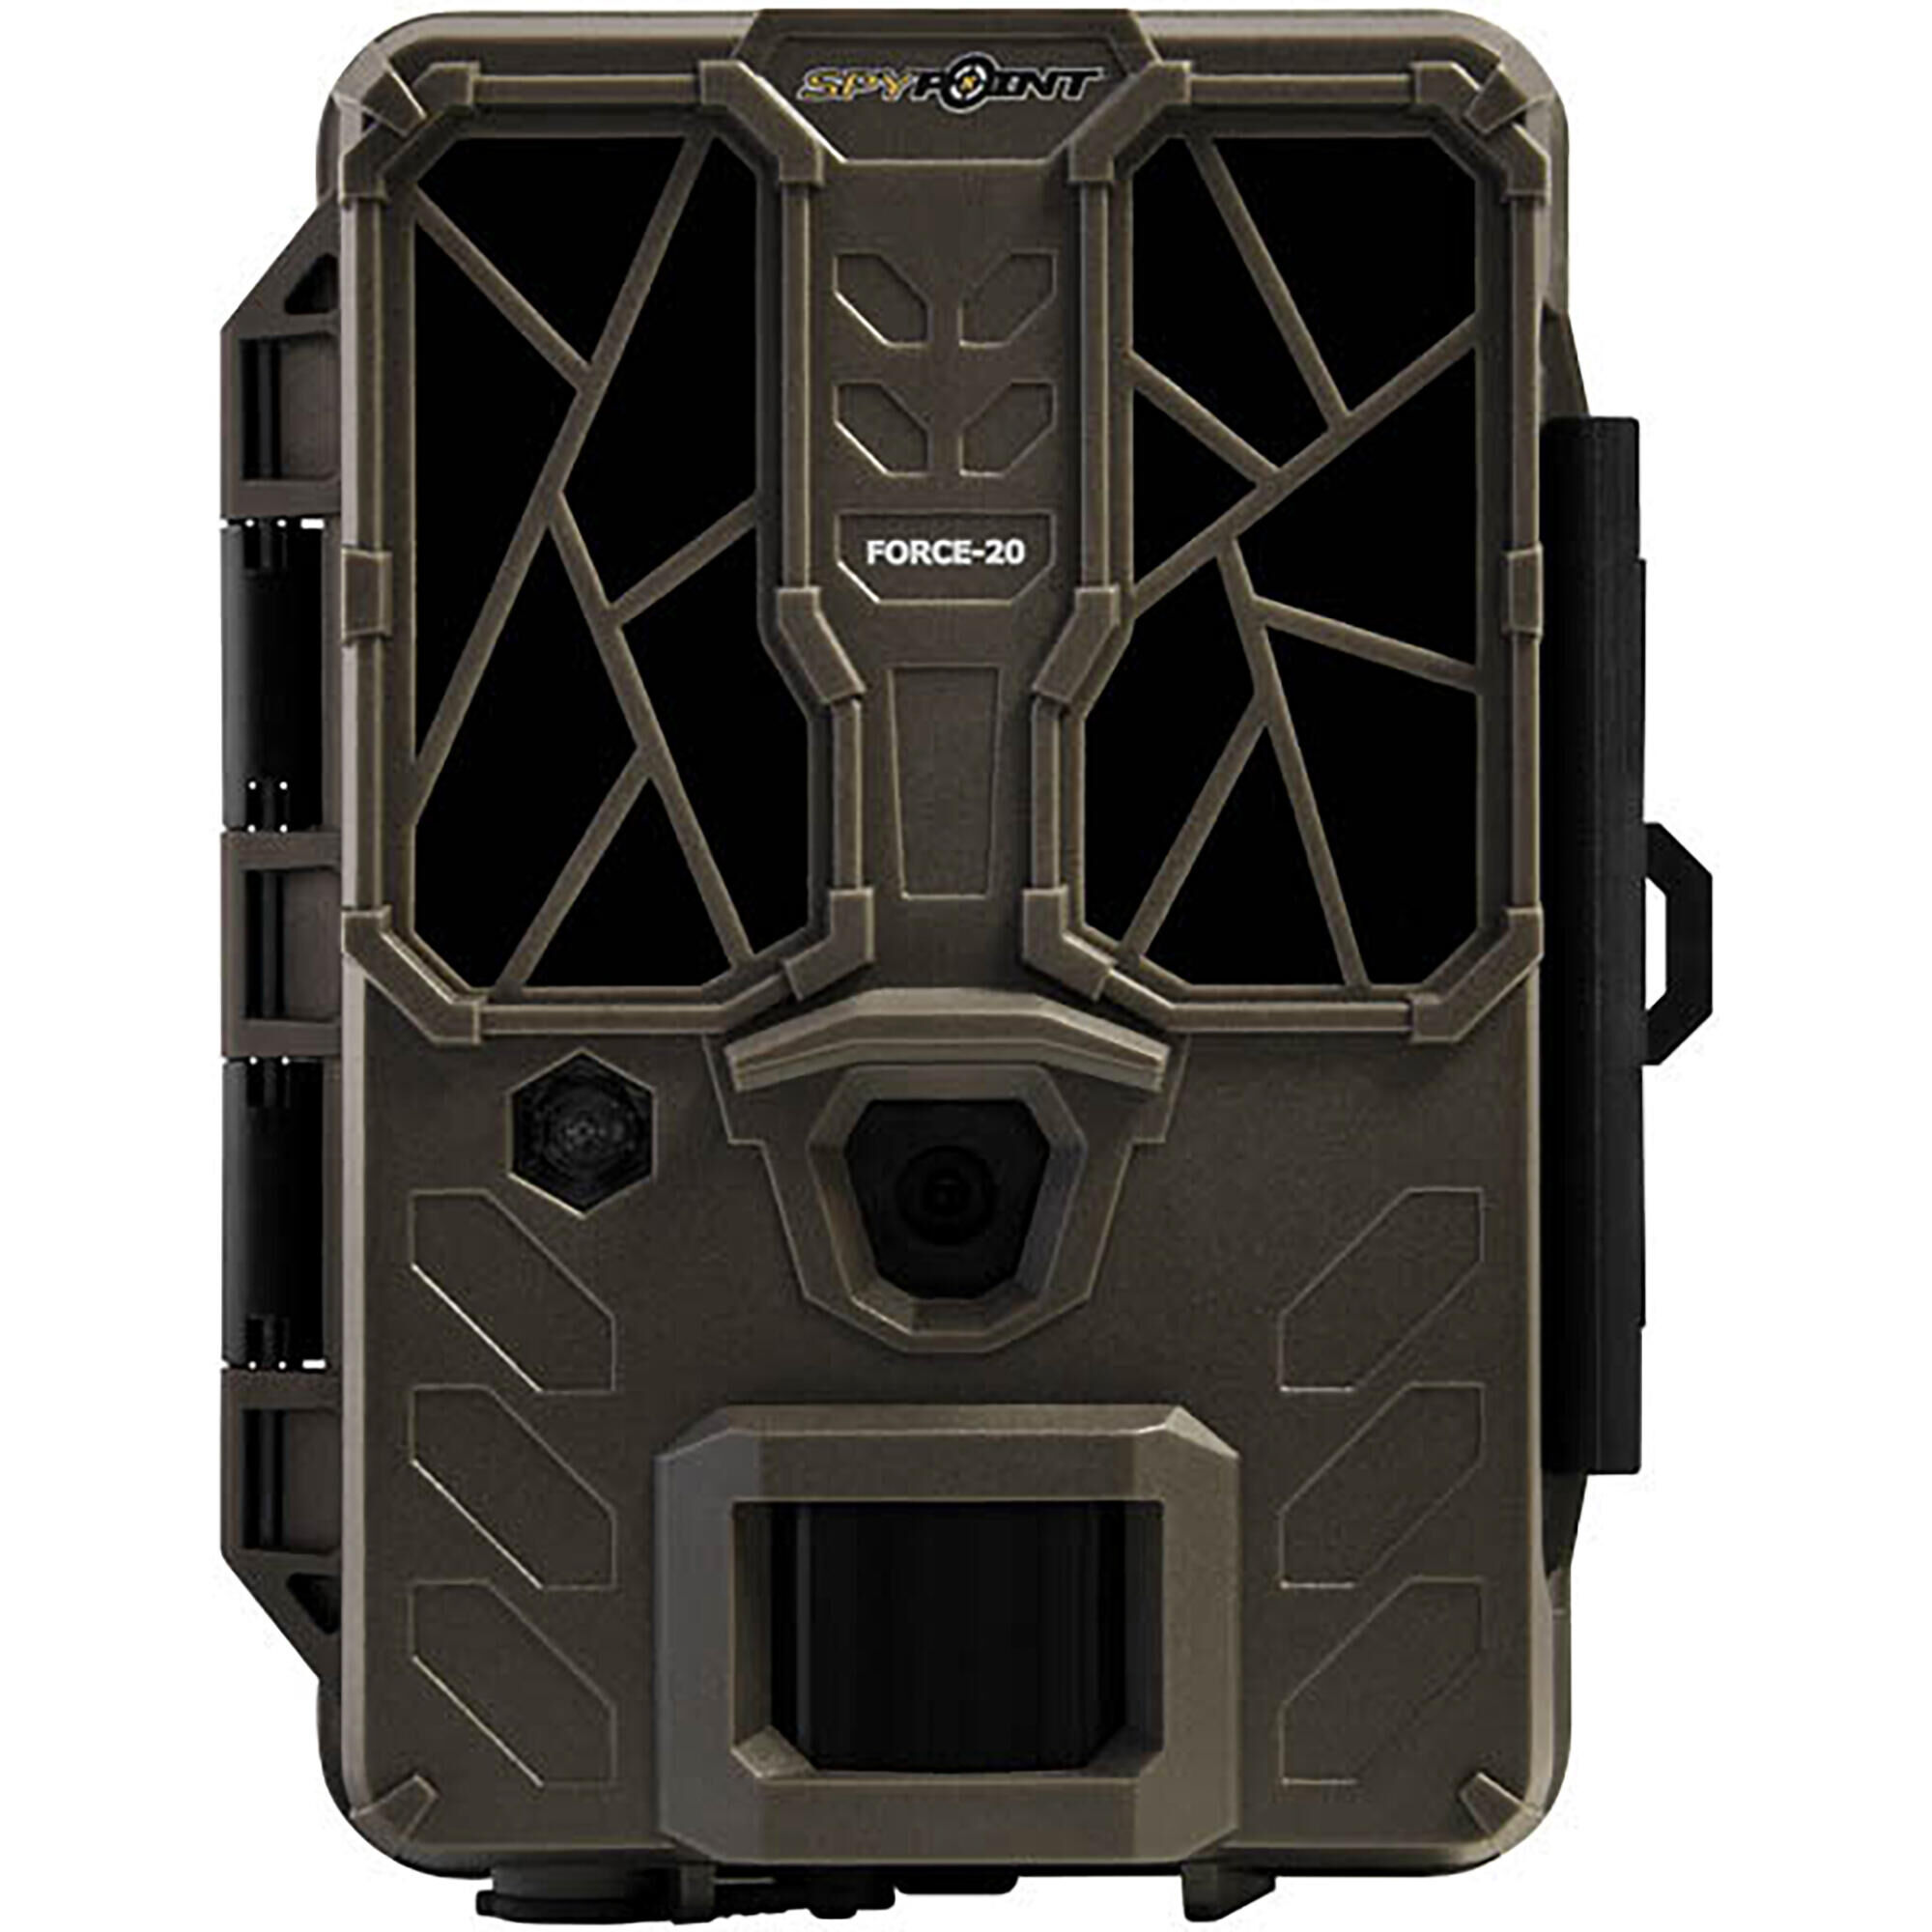 SPYPOINT Camera trap for hunting/wildlife SPYPOINT FORCE 20